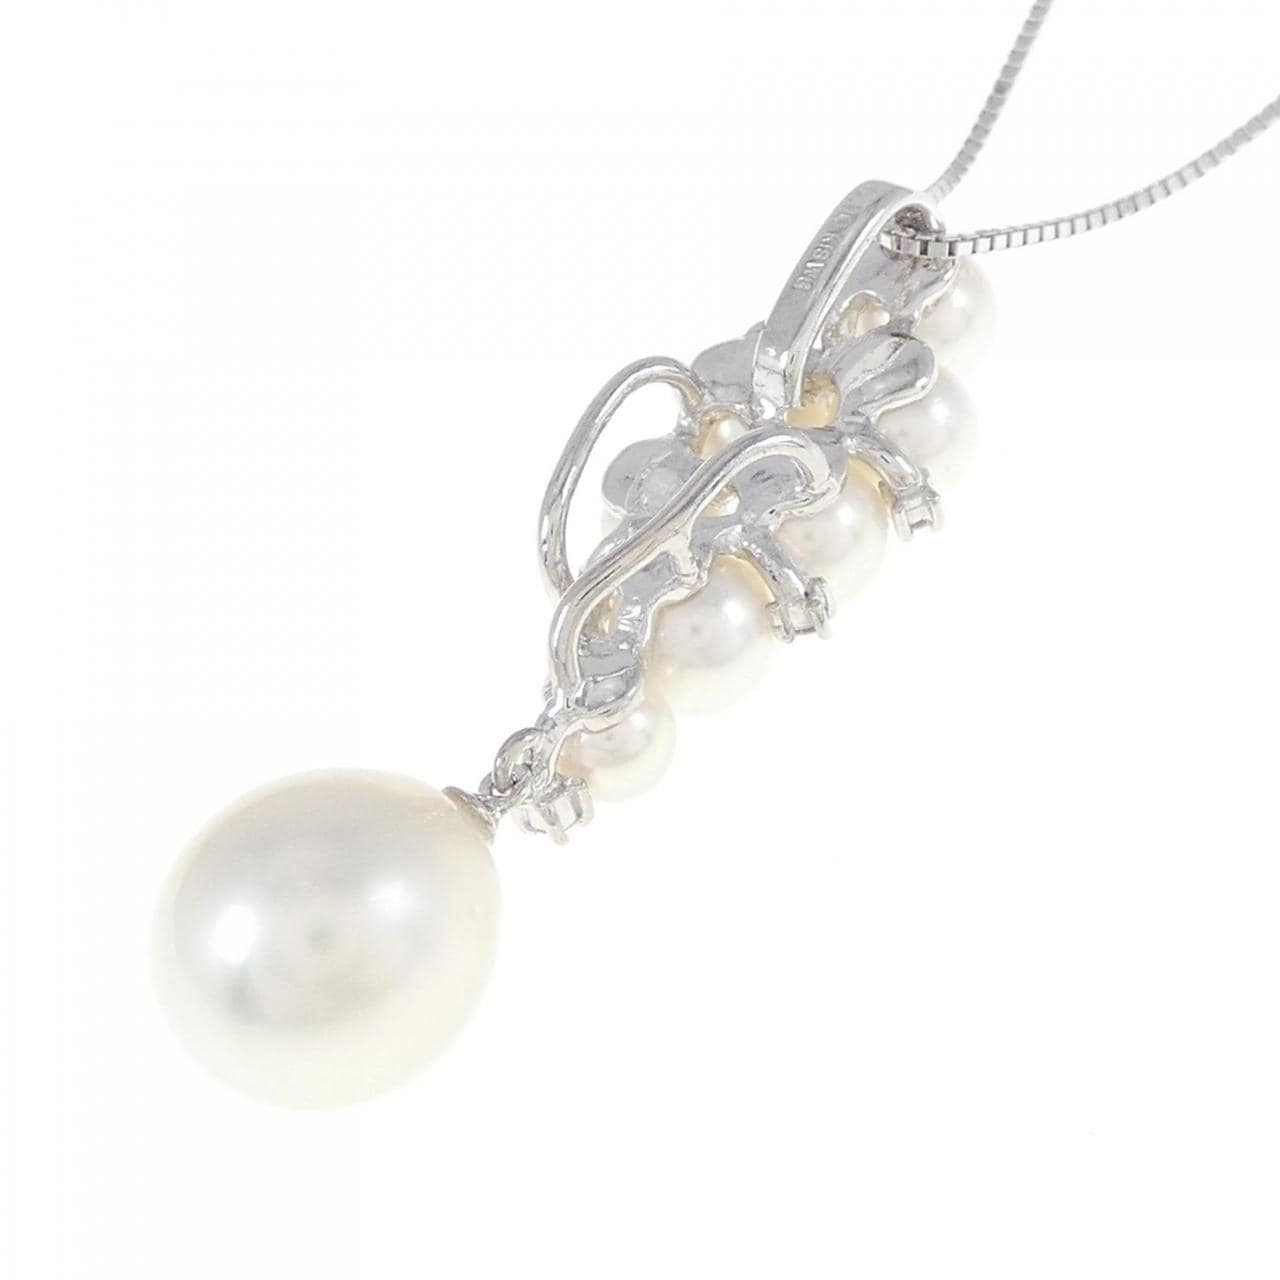 K18WG pearl necklace